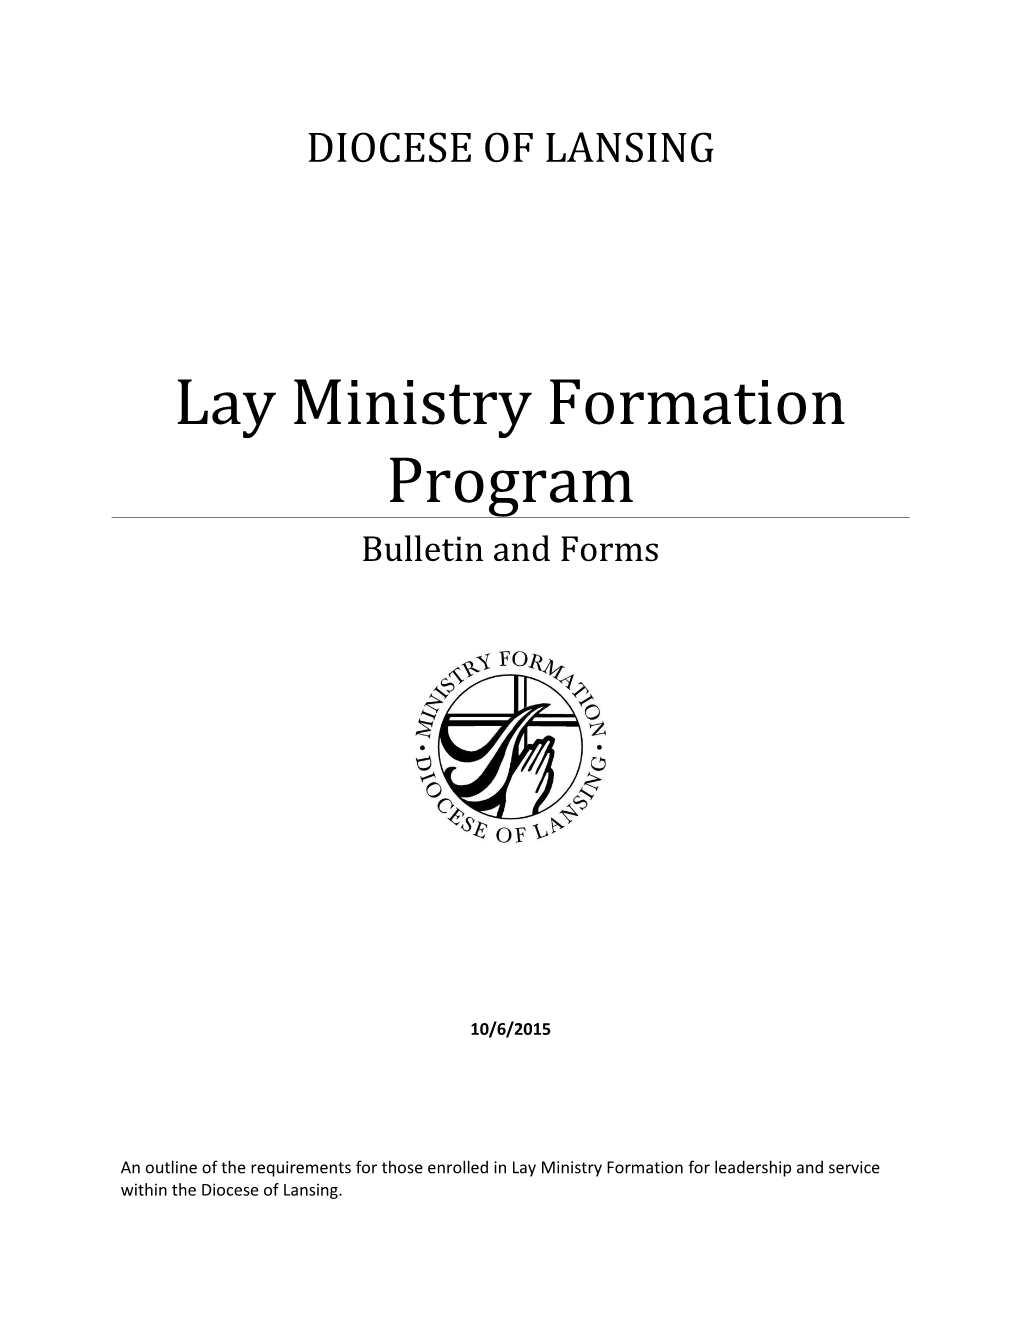 Lay Ministry Formation Program Bulletin and Forms